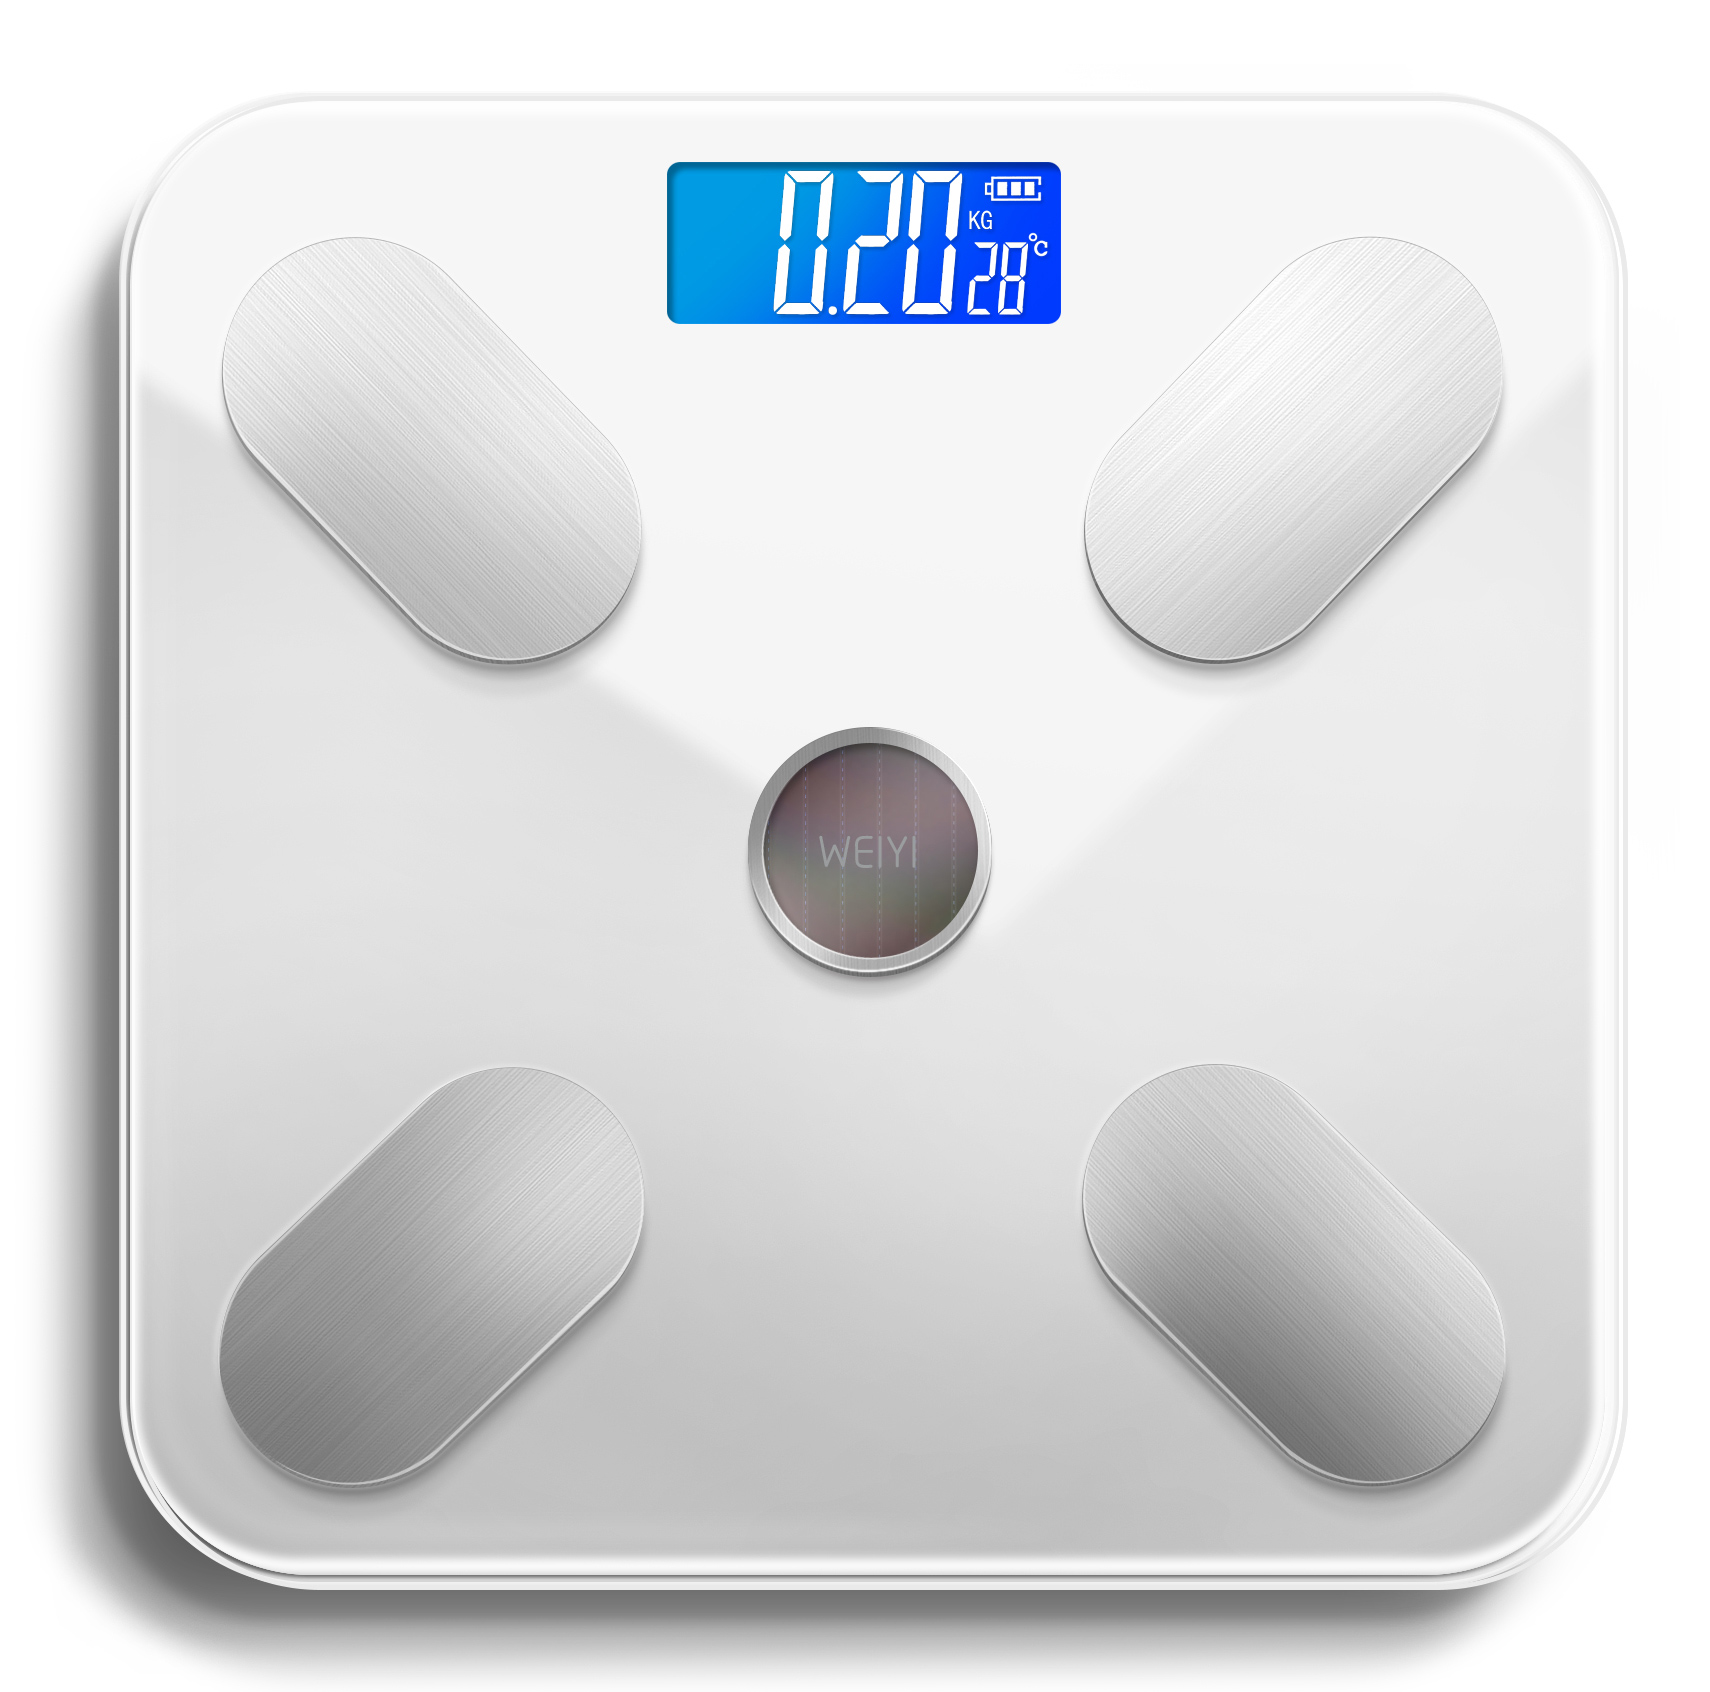 cost of weighing machine for humans